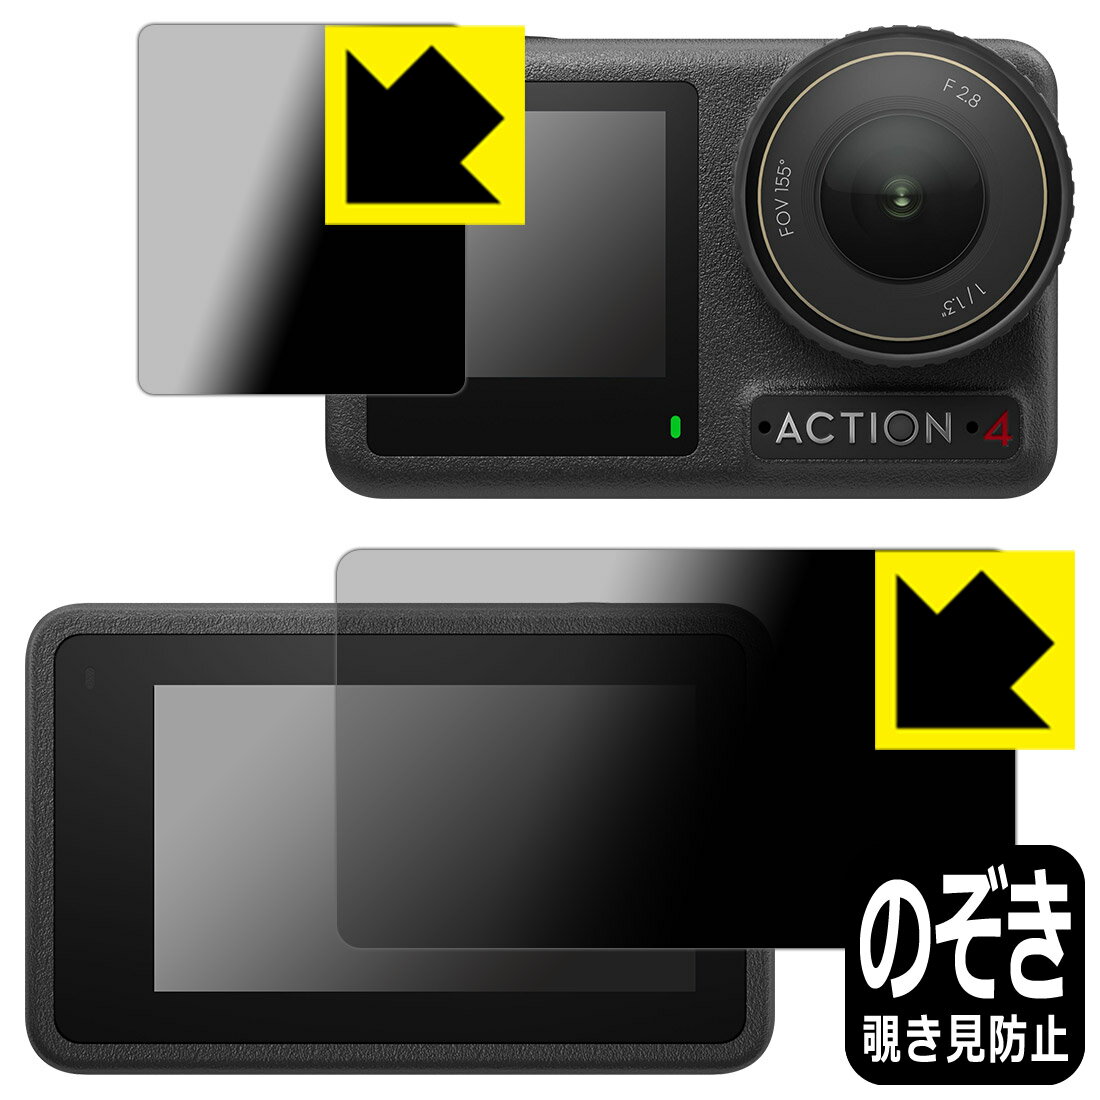 PDAH[ DJI Osmo Action 4 Ή Privacy Shield ی tB [Cp/Tup] `h~ ˒ጸ { { А